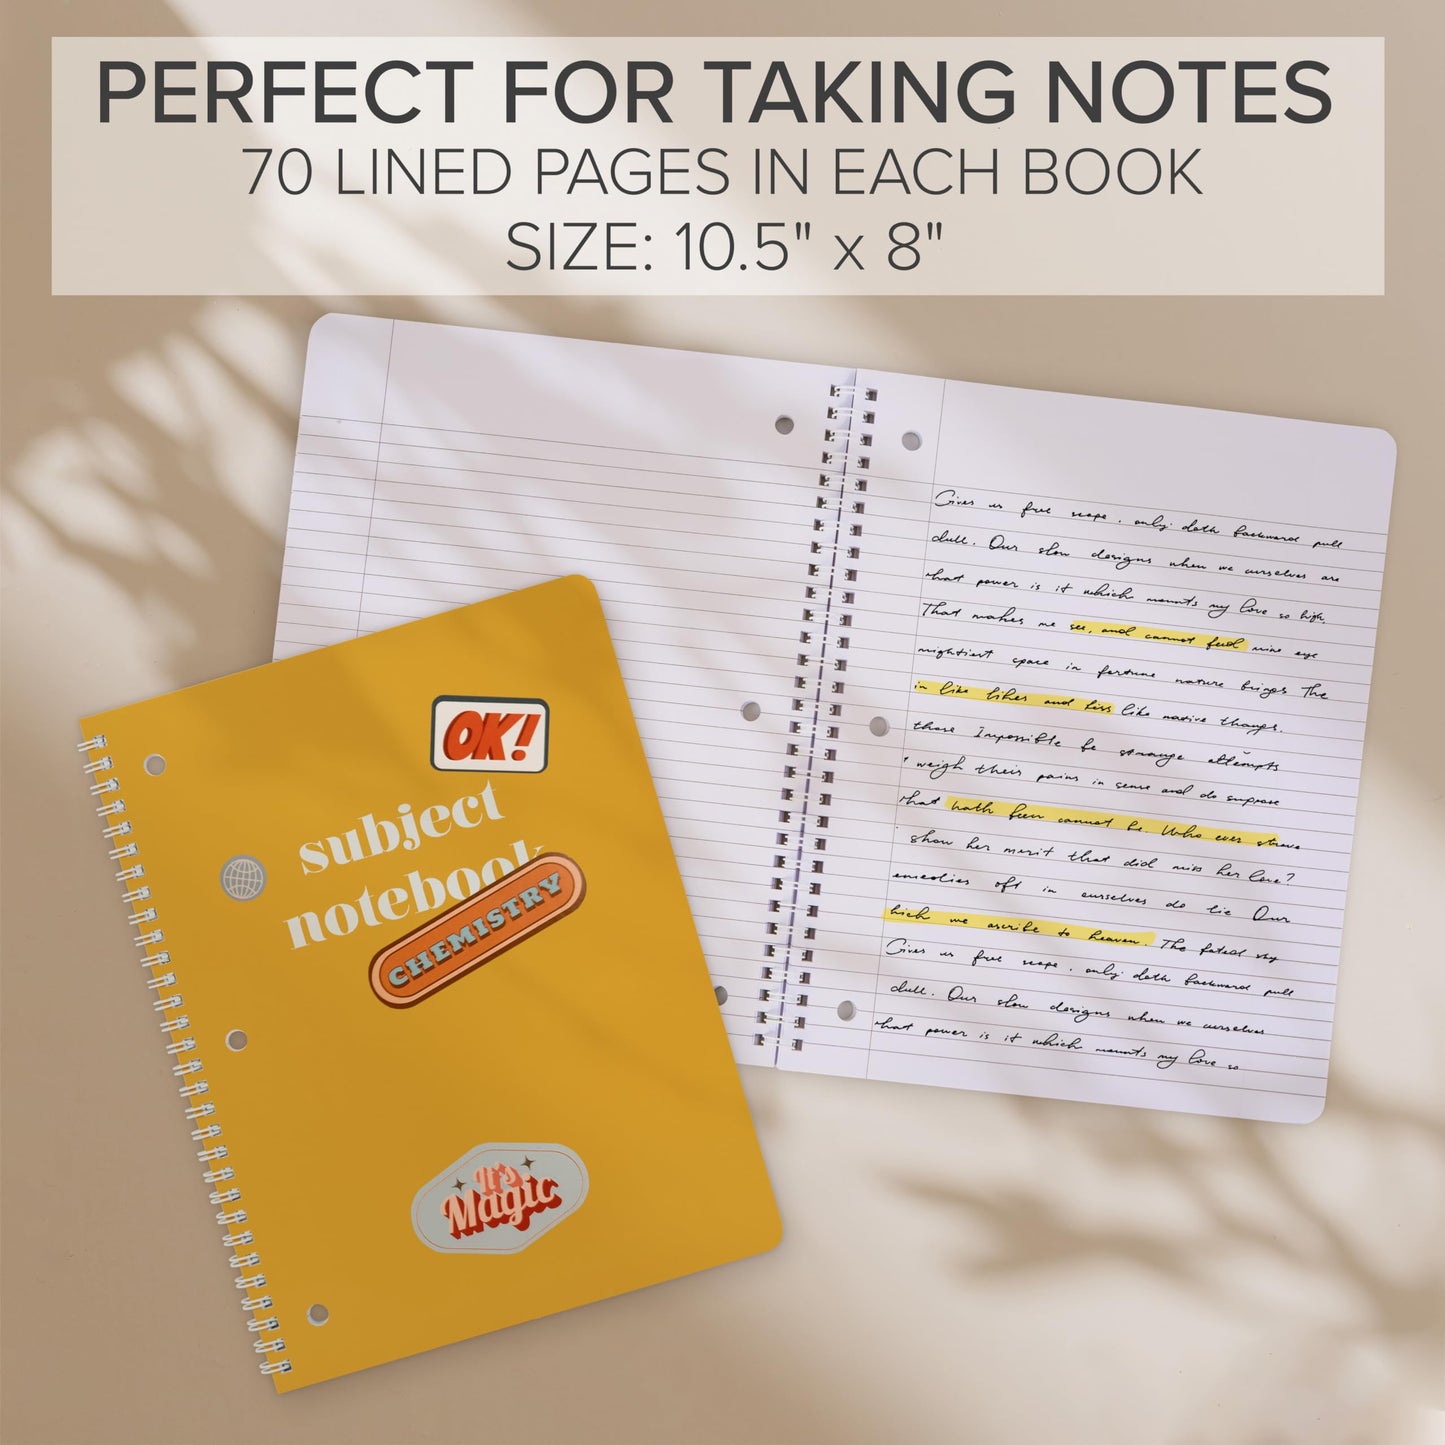 ZICOTO Aesthetic Spiral Subject Notebook Set of 3 For School or College - The Perfect 8" x 10.5" College Ruled Notebook with Premium Paper - Cute Student Supplies to Stay Organized at School